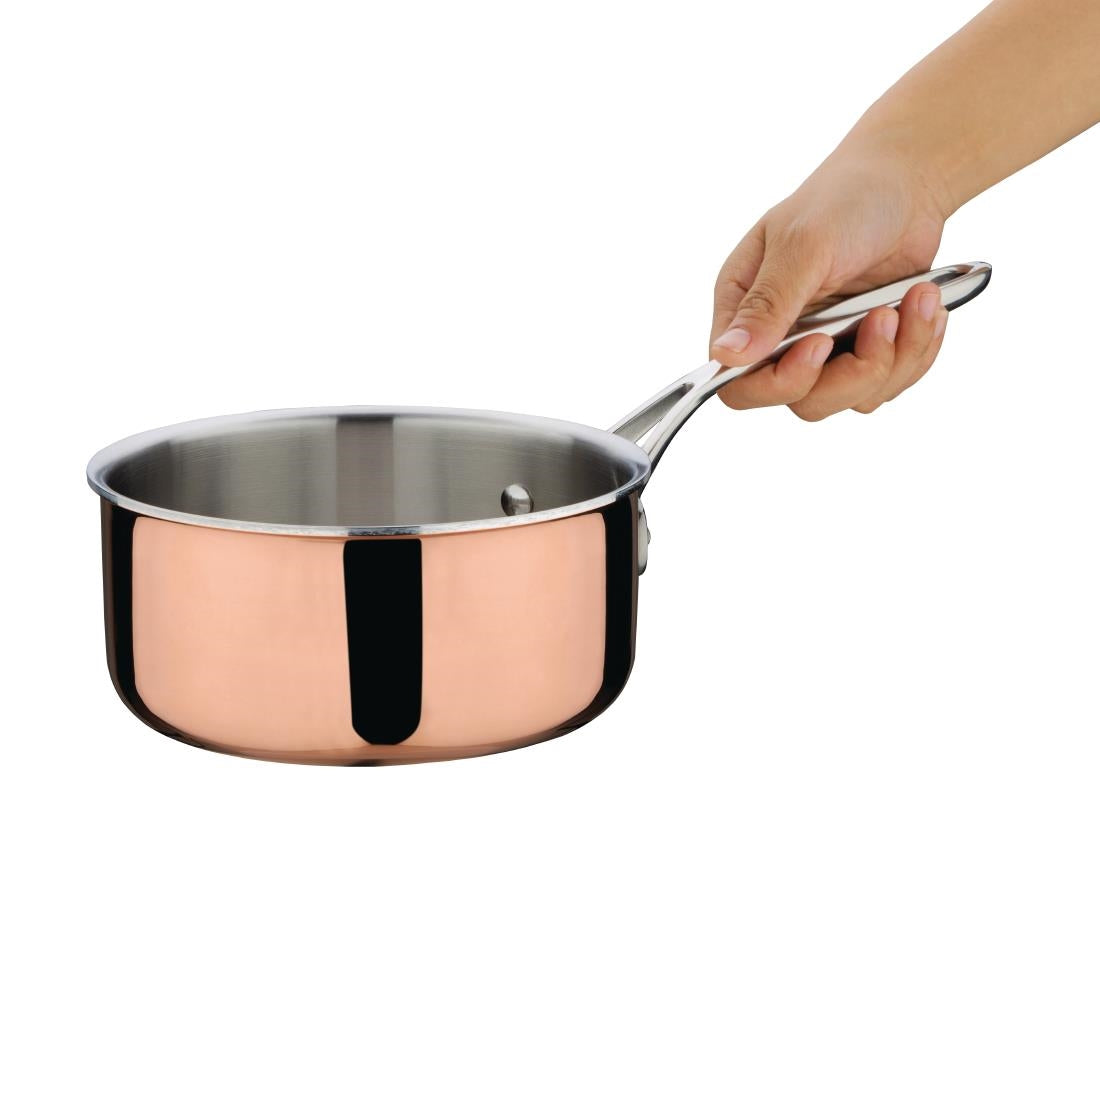 CT998 Vogue Induction Tri Wall Copper Saucepan 160mm JD Catering Equipment Solutions Ltd